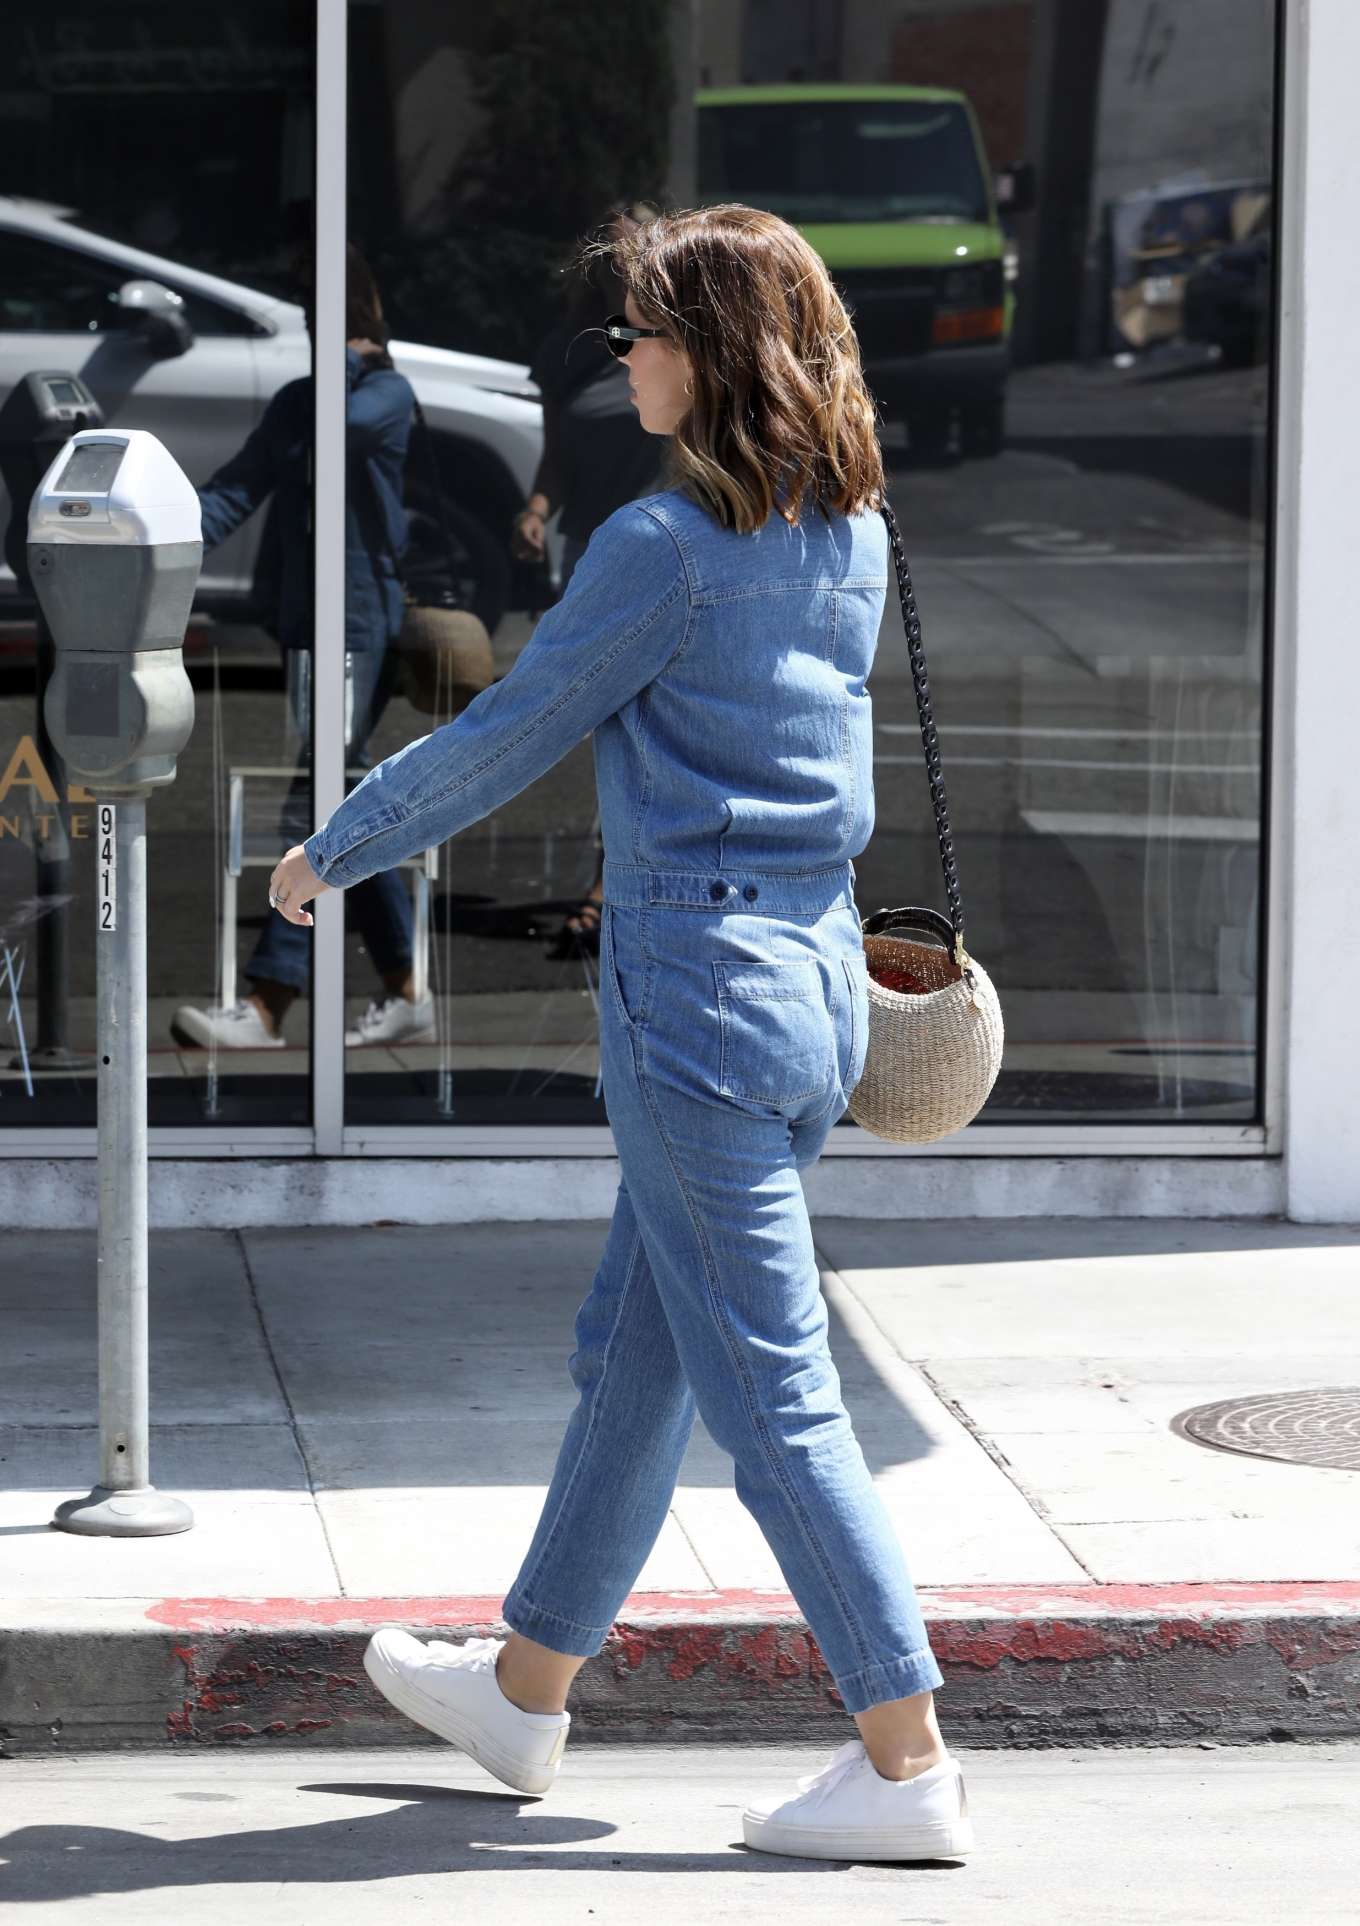 Katherine Schwarzenegger 2019 : Katherine Schwarzenegger in jeans jumpsuit leaves a pet adoption animal shelter in Los Angeles-07